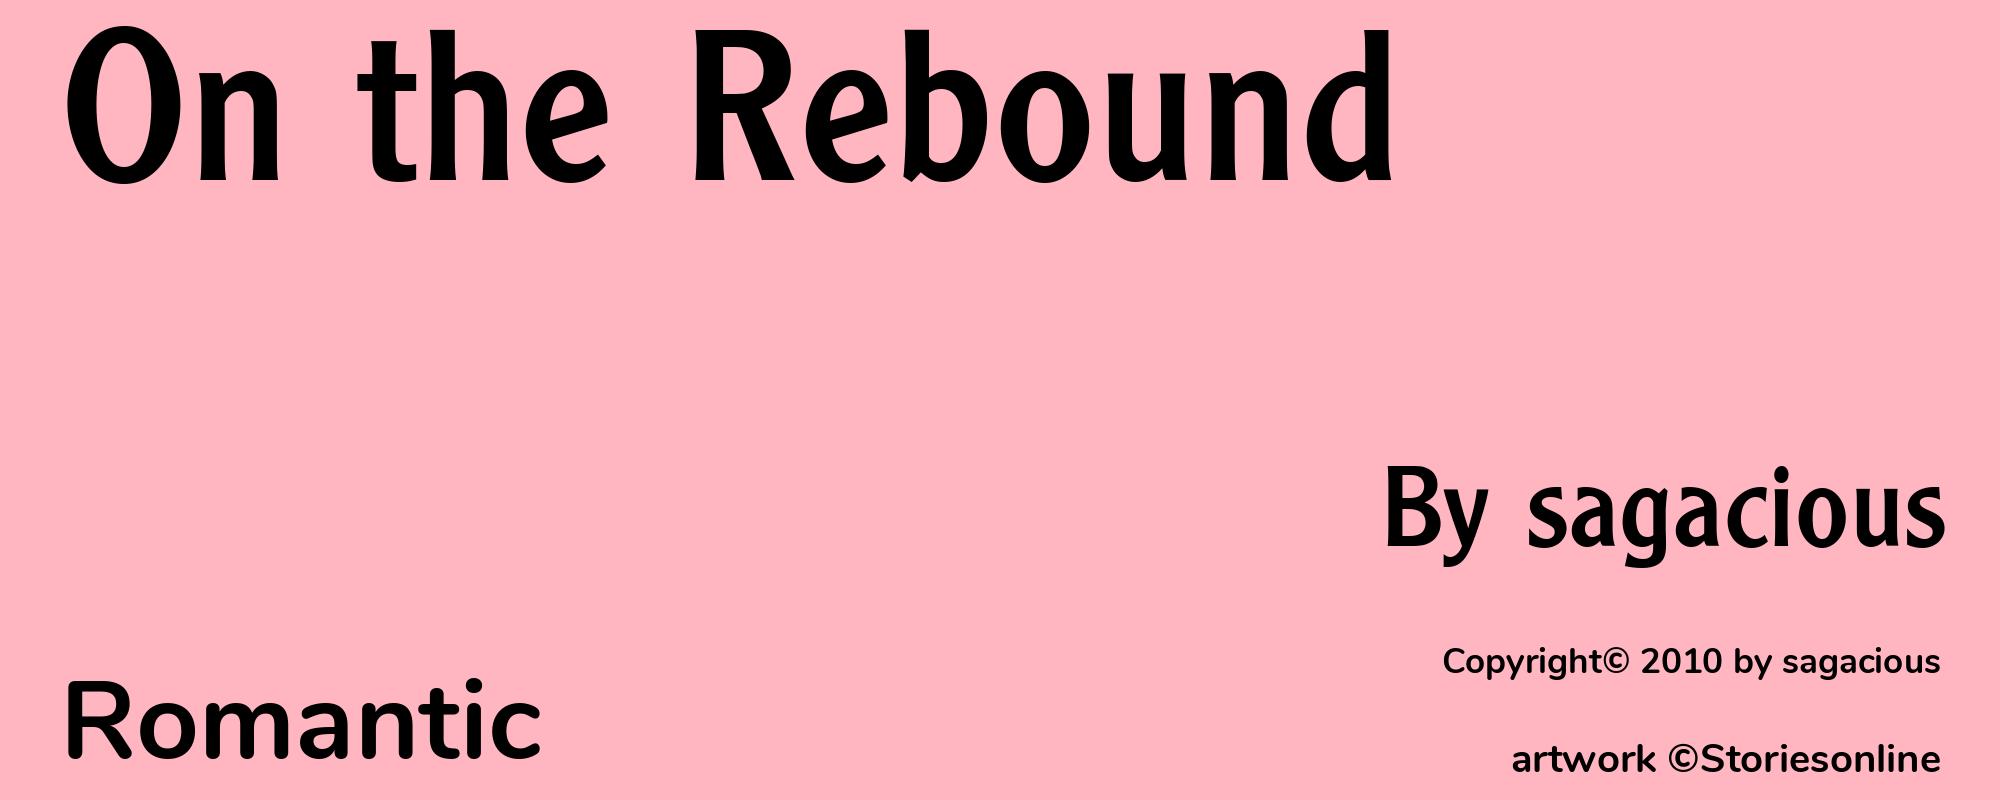 On the Rebound - Cover